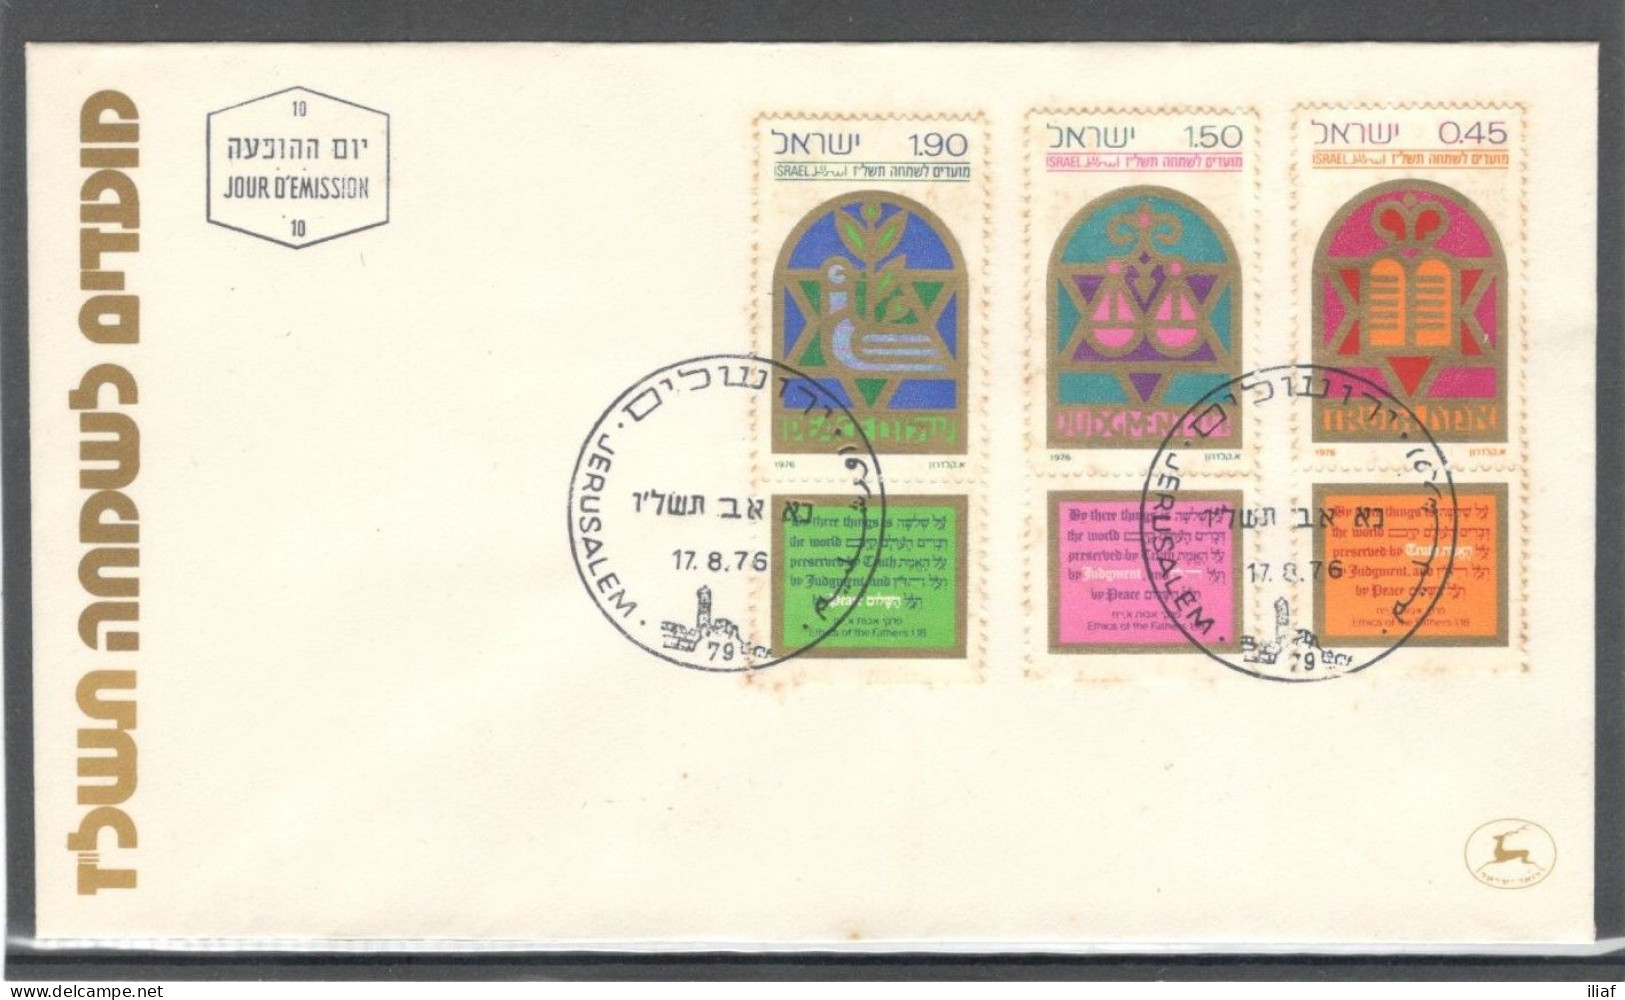 Israel 1976 FDC Sc. 606-608  FESTIVALS 5737 (1976)  FDC Cancellation On Cachet FDC Envelope - FDC